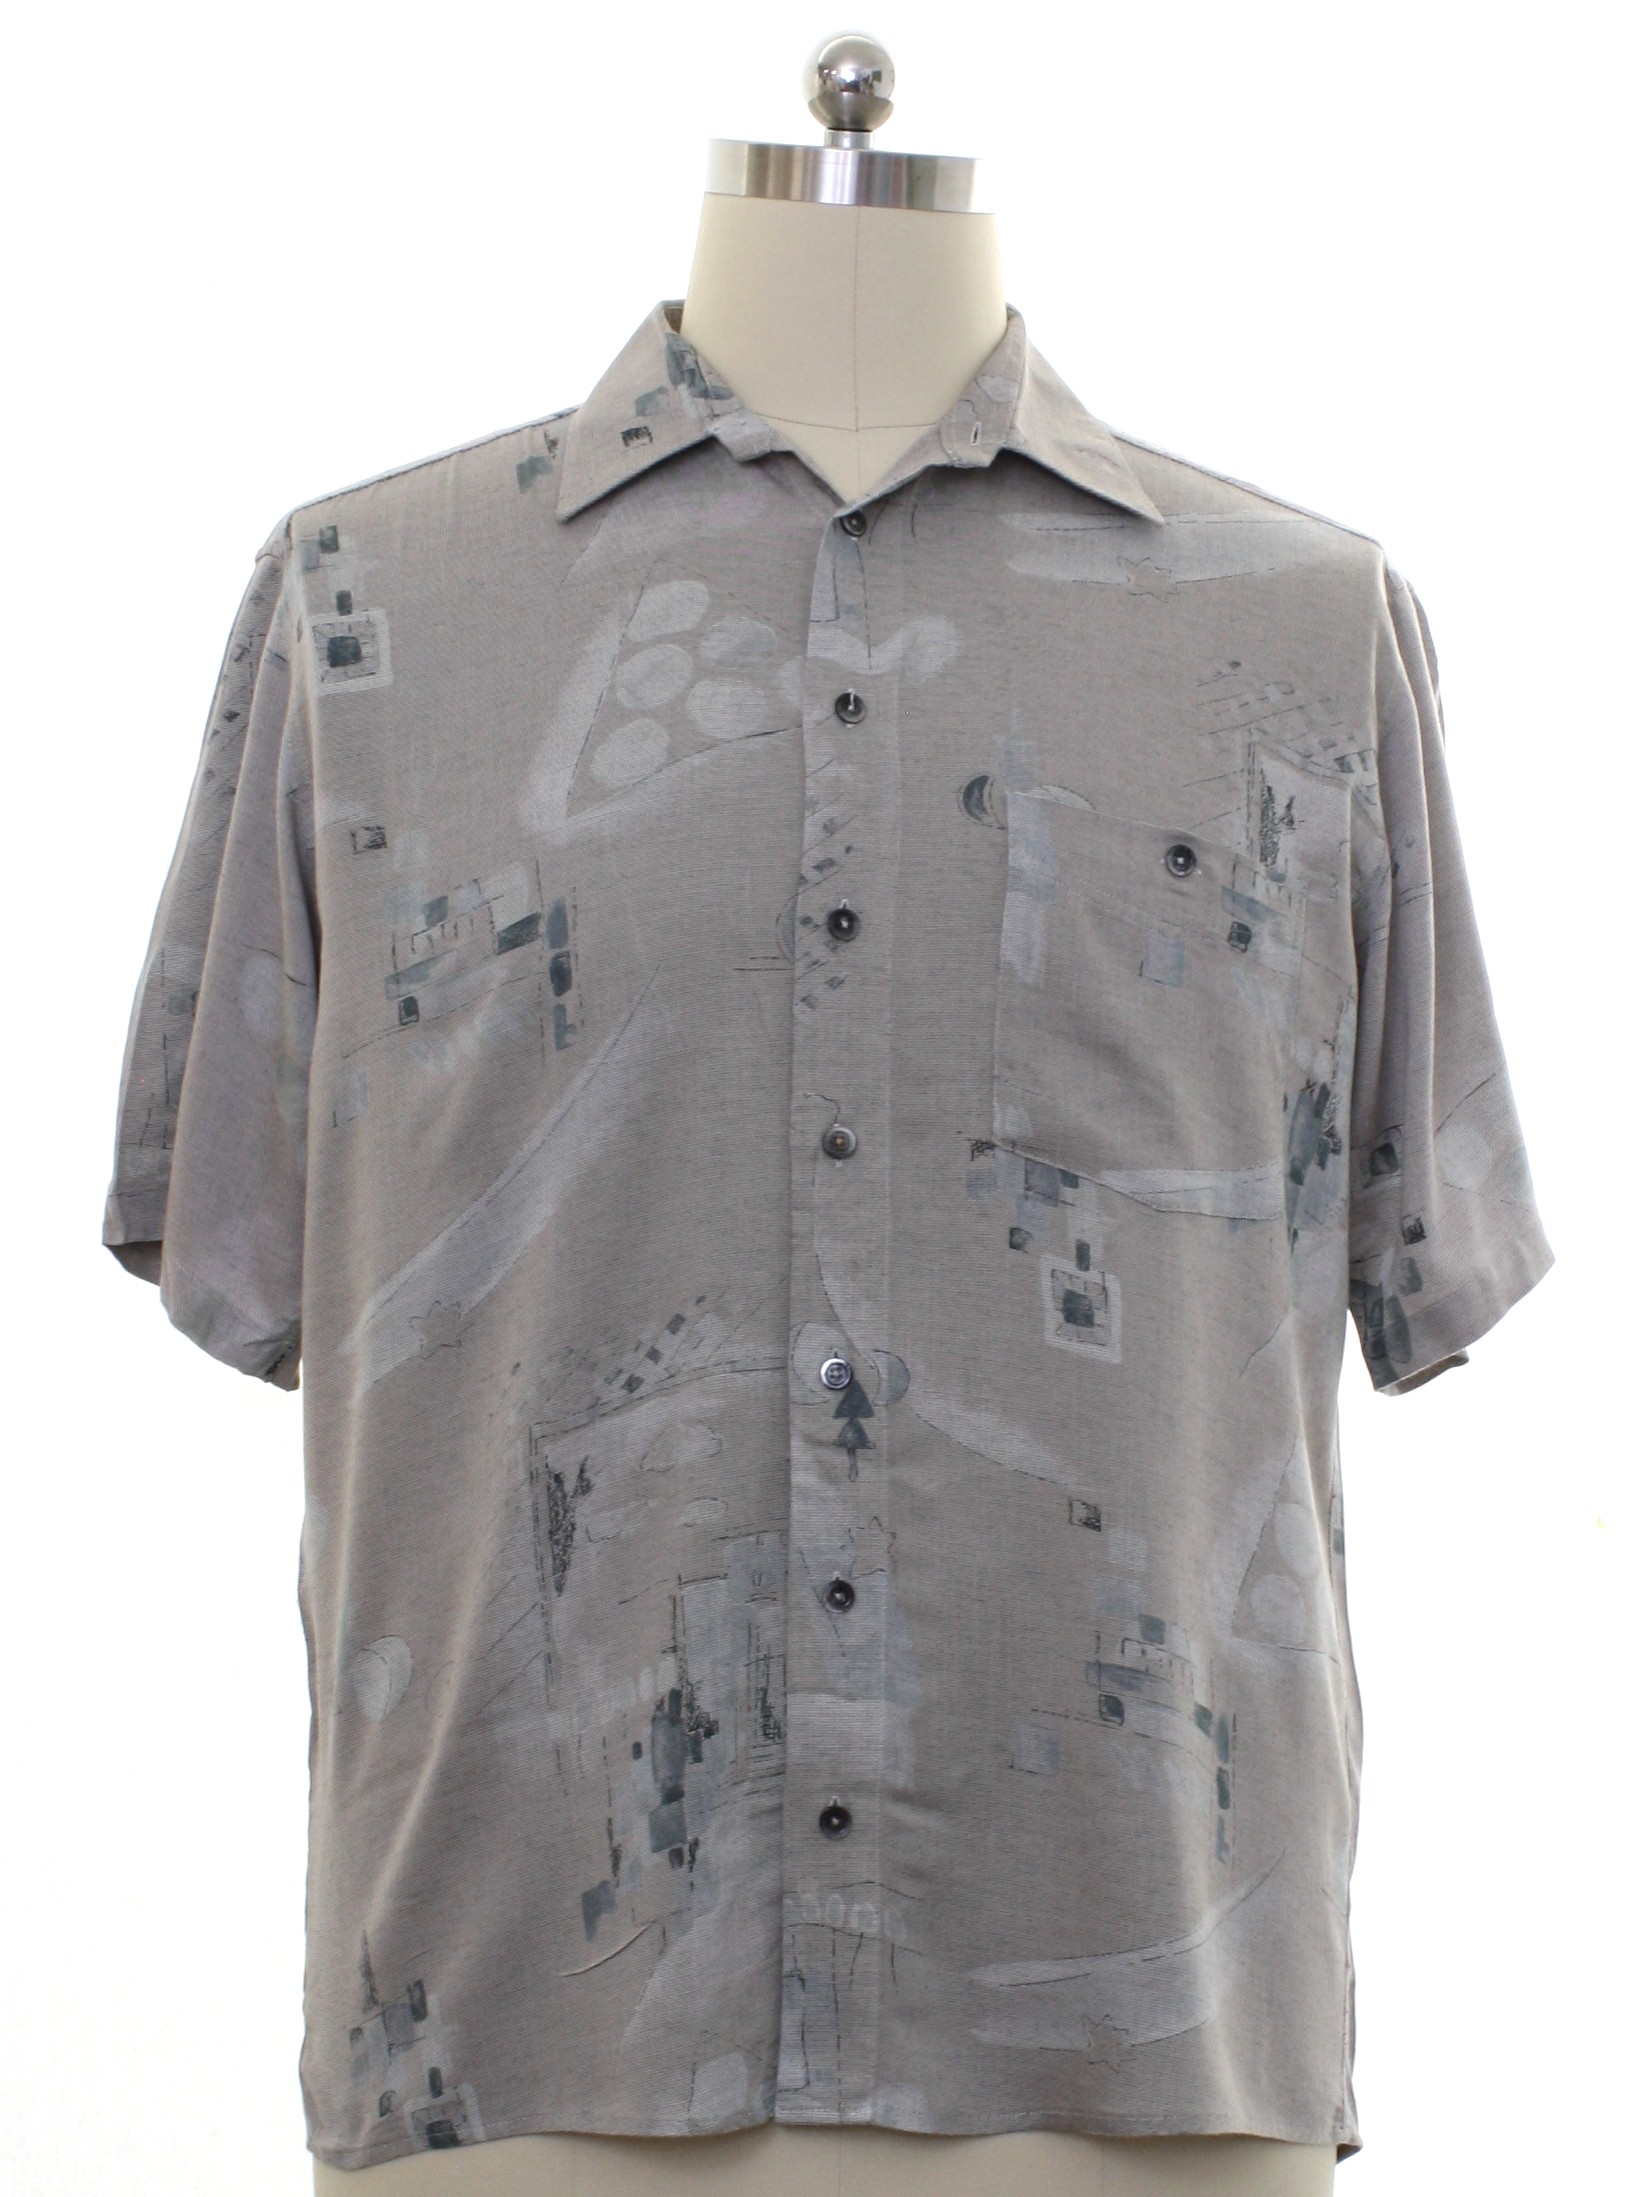 Tale stilhed blande Casa Moda 80's Vintage Shirt: Late 80s -Casa Moda- Mens beige background,  black, gray, charcoal drapey rayon totally 80s graphic print sport shirt  with short sleeves, rounded slight shirttails hemline, button front